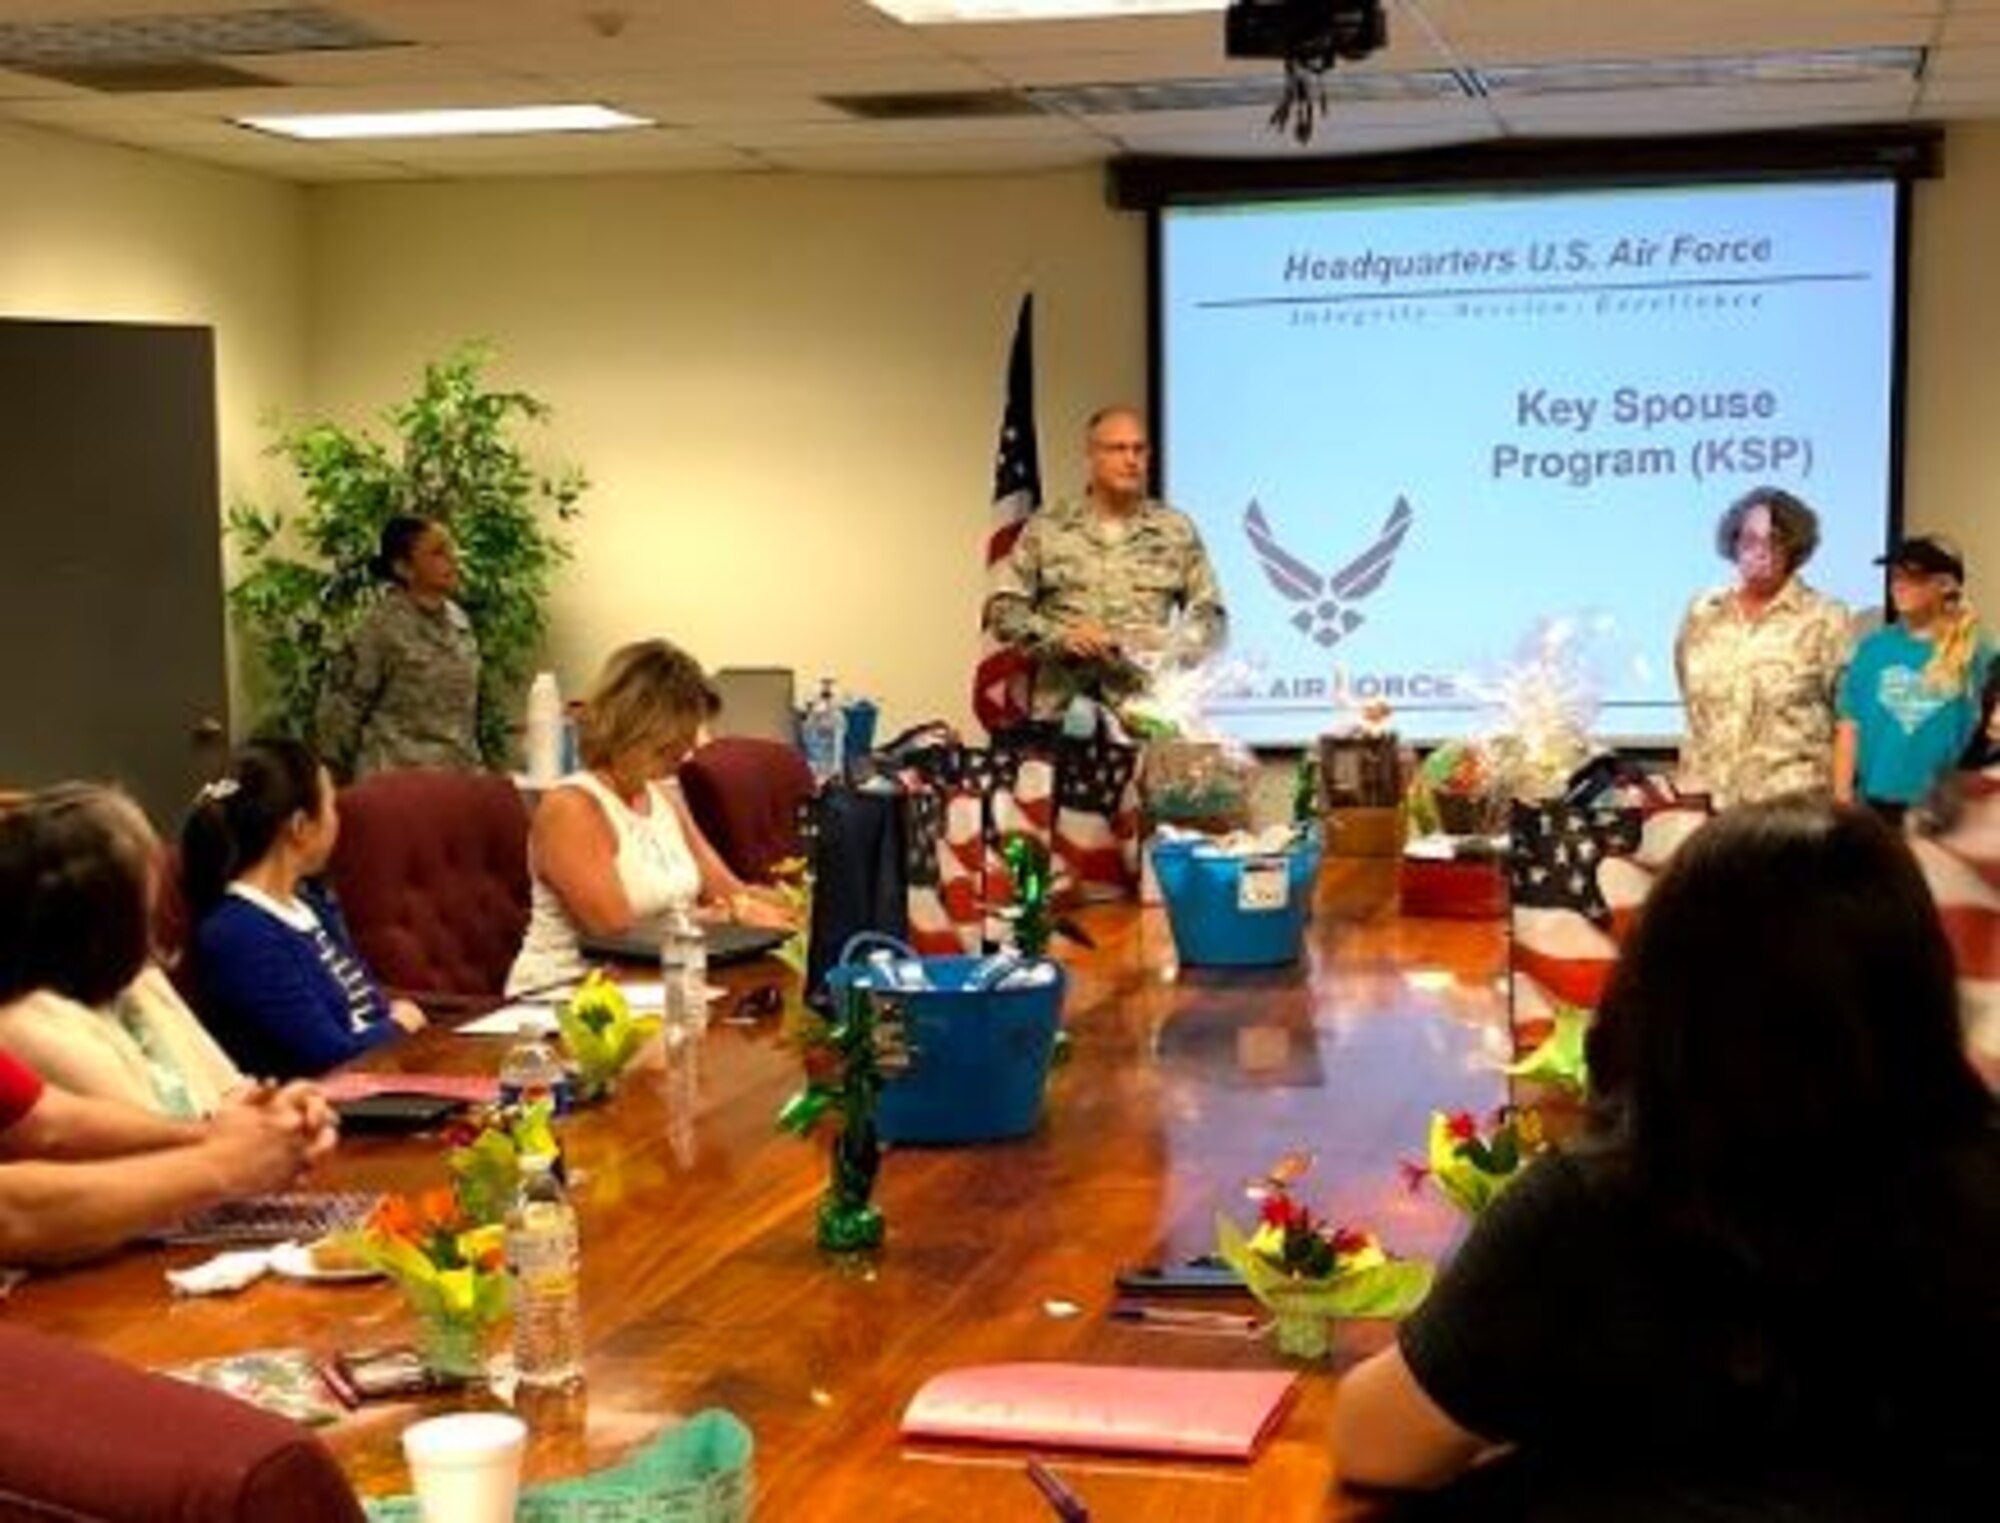 The 452nd Air Mobility Wing conducted training for its Key Spouse squadron representatives at the 452nd Mission Support Group conference room on Saturday, May 5, 2018 here at March Air Reserve Base.